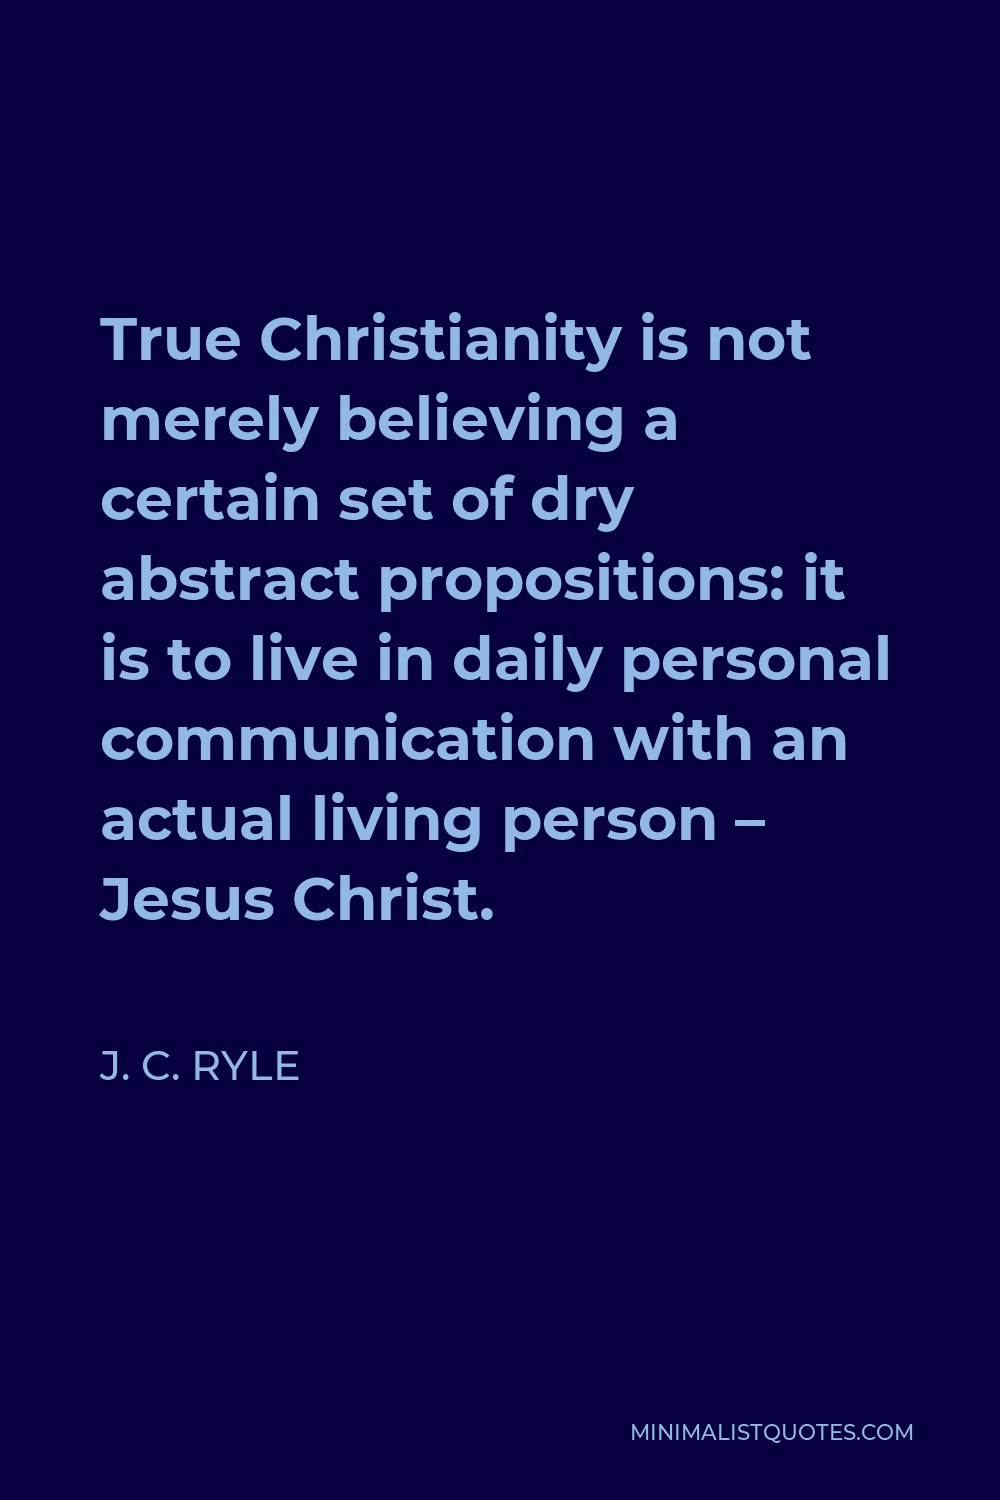 J. C. Ryle Quote - True Christianity is not merely believing a certain set of dry abstract propositions: it is to live in daily personal communication with an actual living person – Jesus Christ.